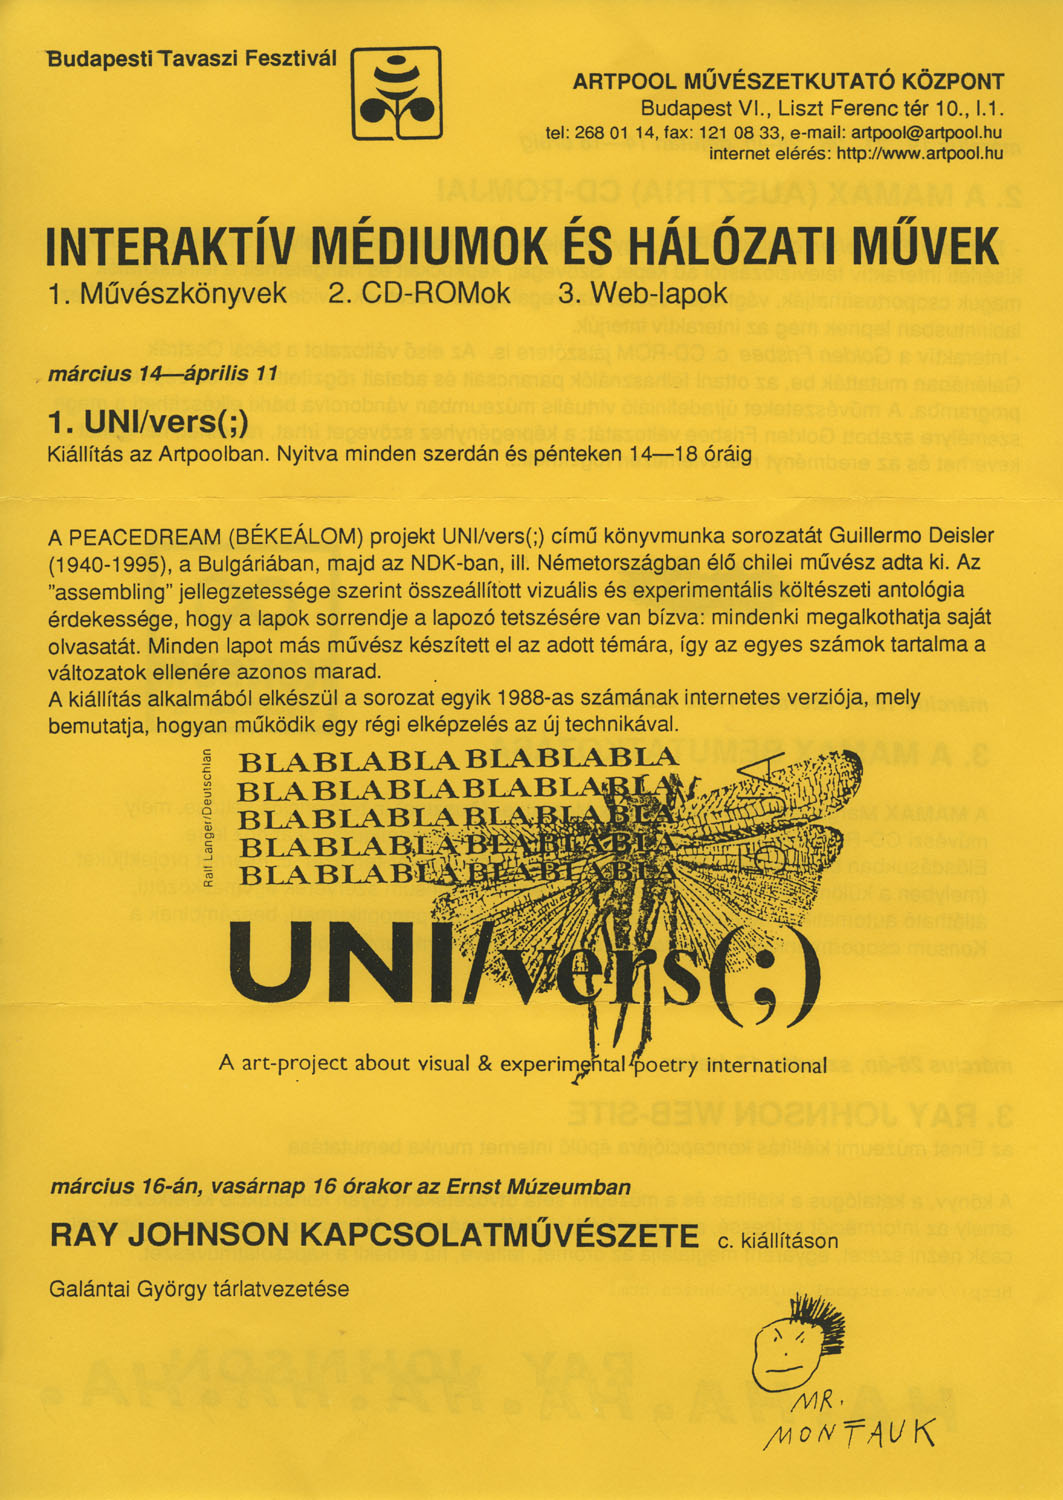 Invitation  for the series of events Interactive Mediums and Net-Works, Artpool Art Research Center, Budapest 1997 (1st and 2nd page)